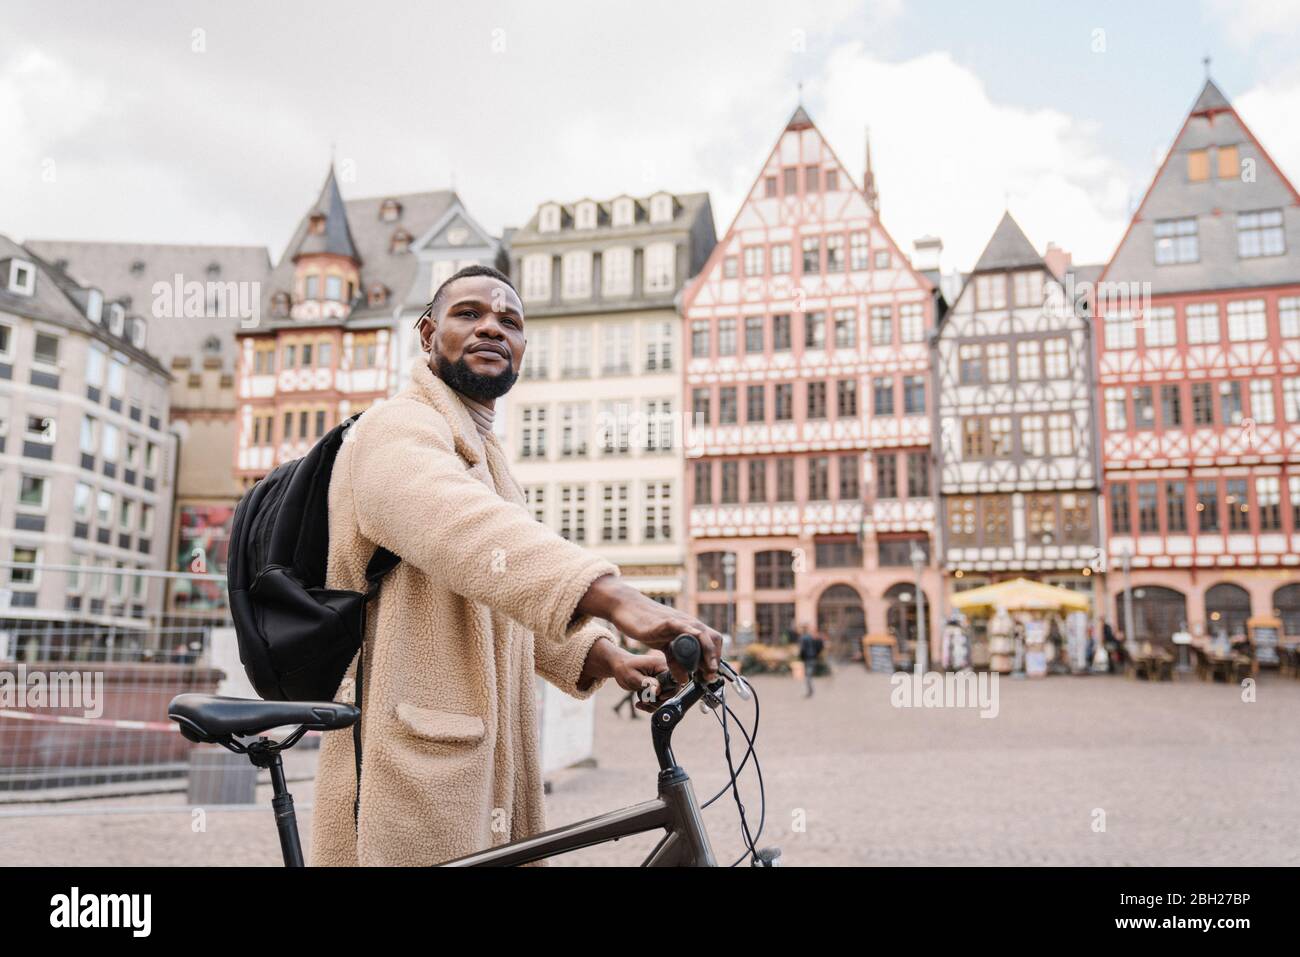 Portrait of stylish man with a bicycle in old town, Frankfurt, Germany Stock Photo